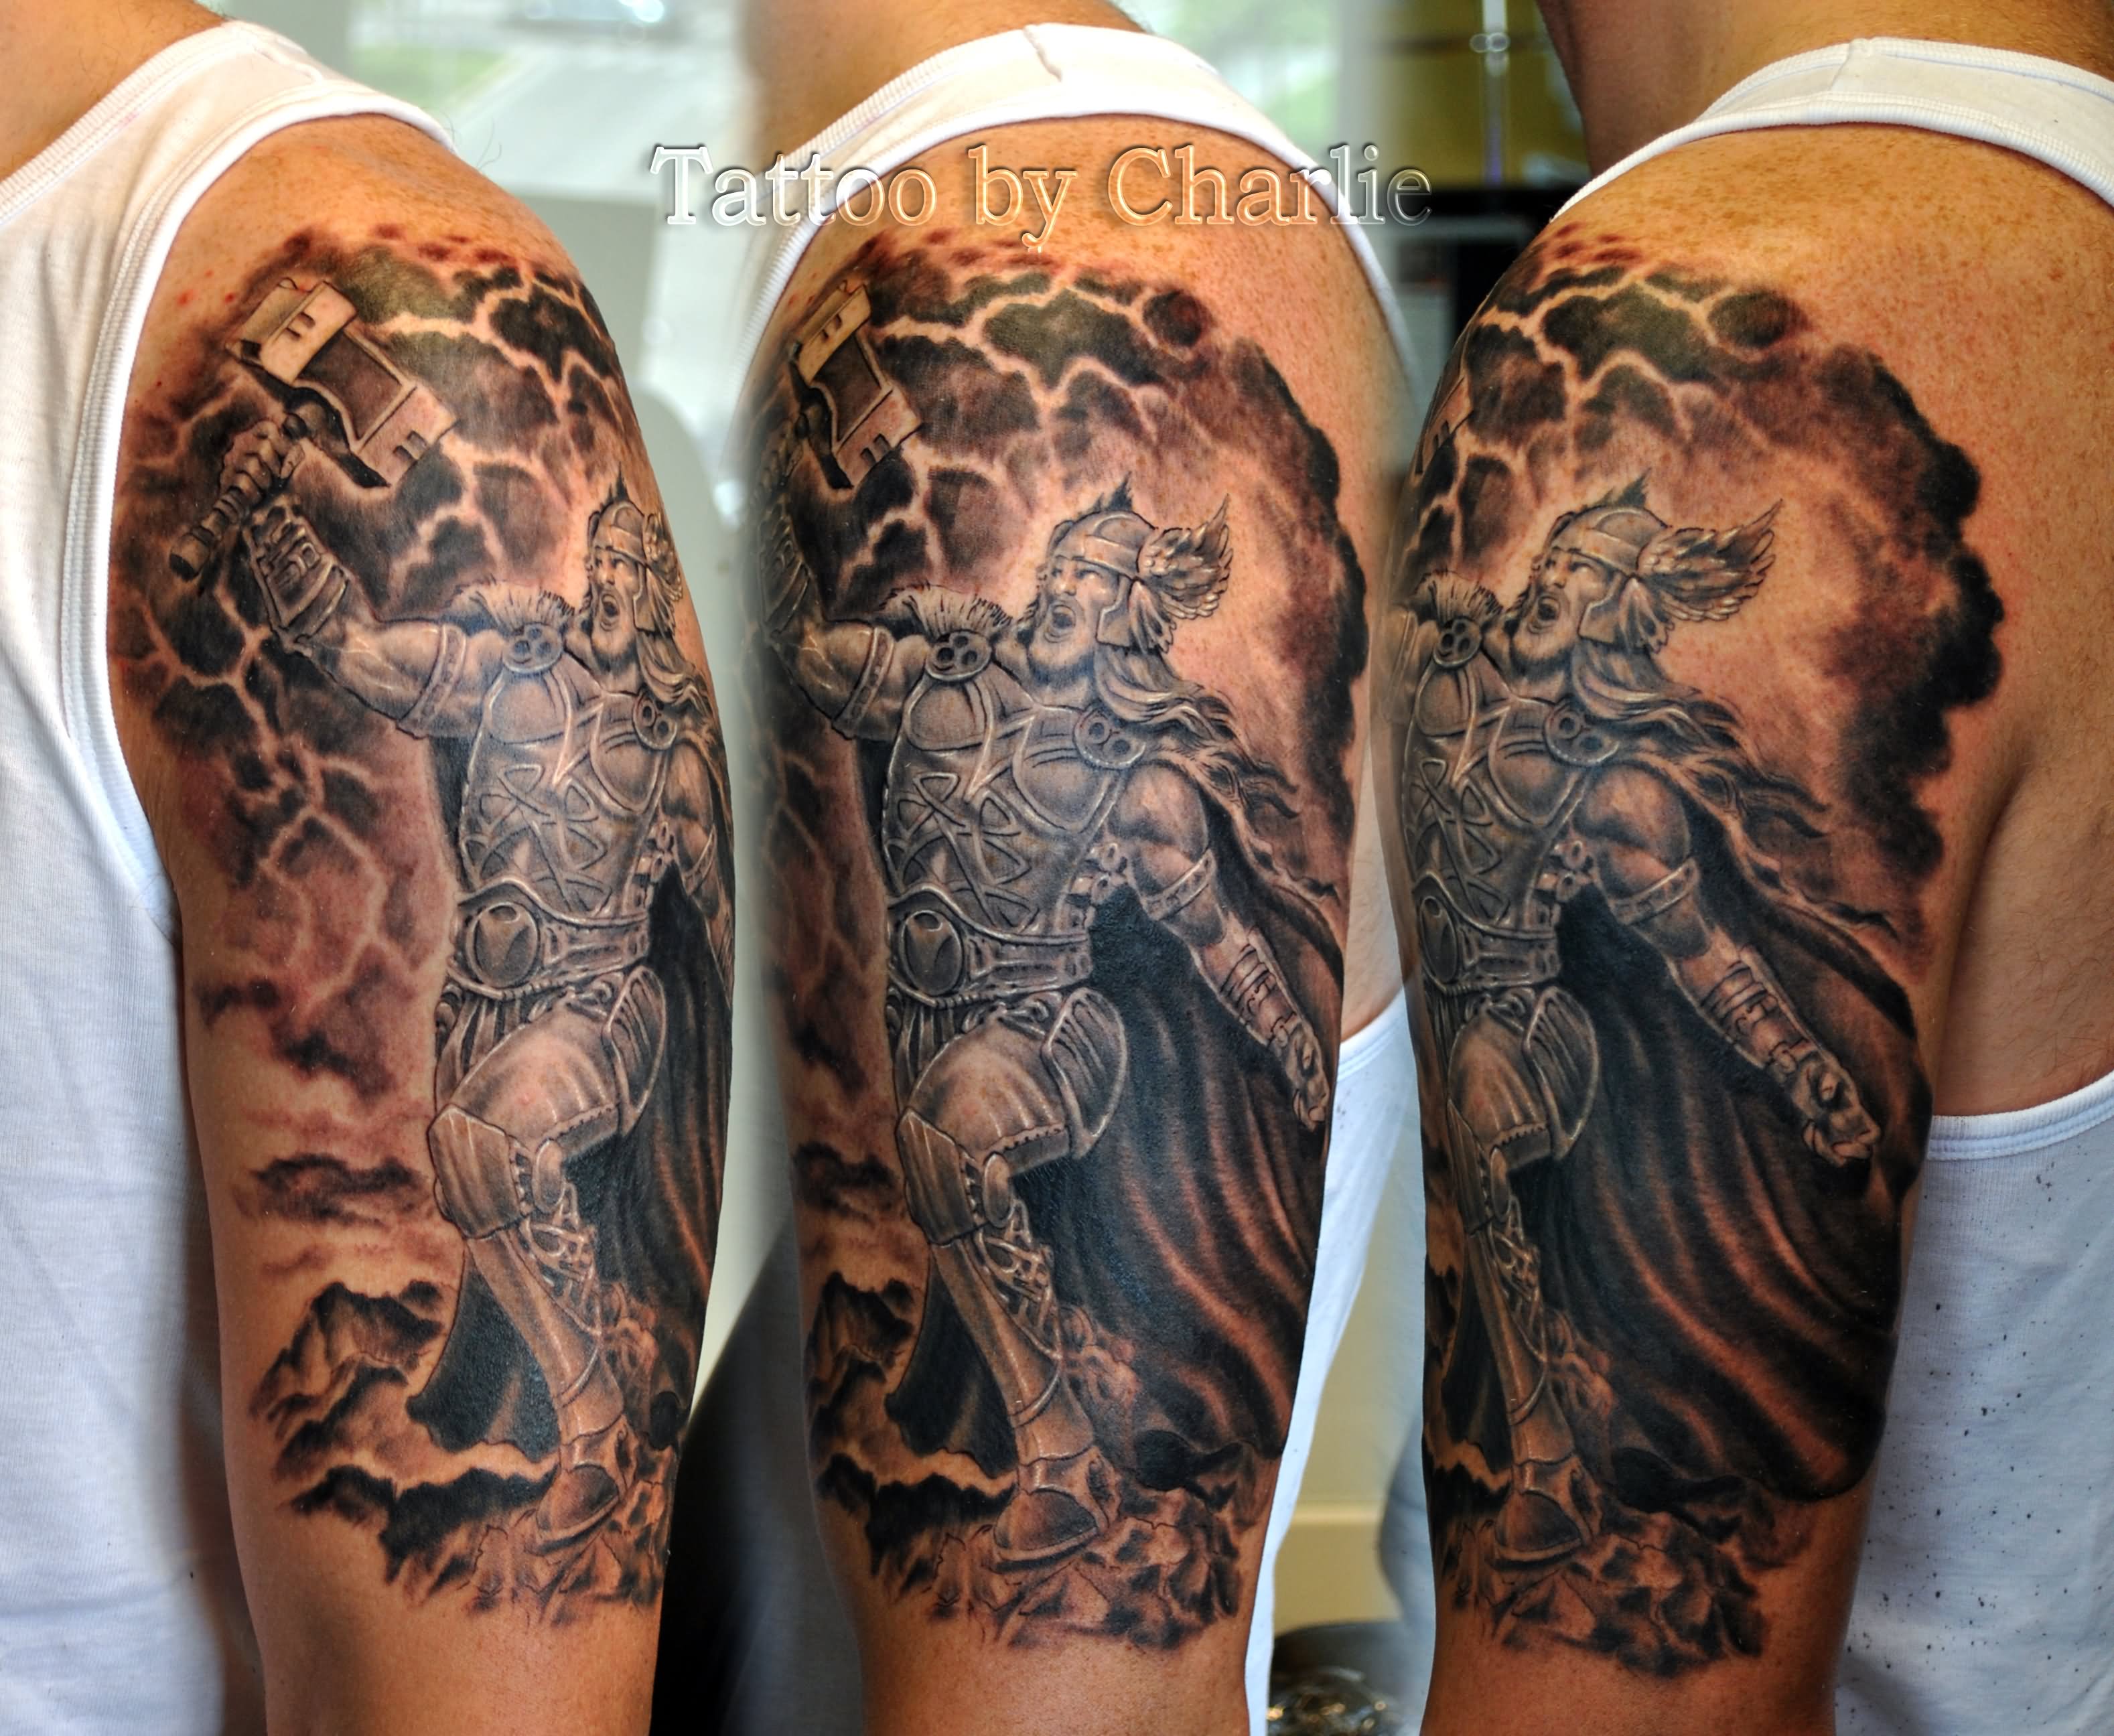 Black And Grey Thor Tattoo On Man Left Half Sleeve By Charlie